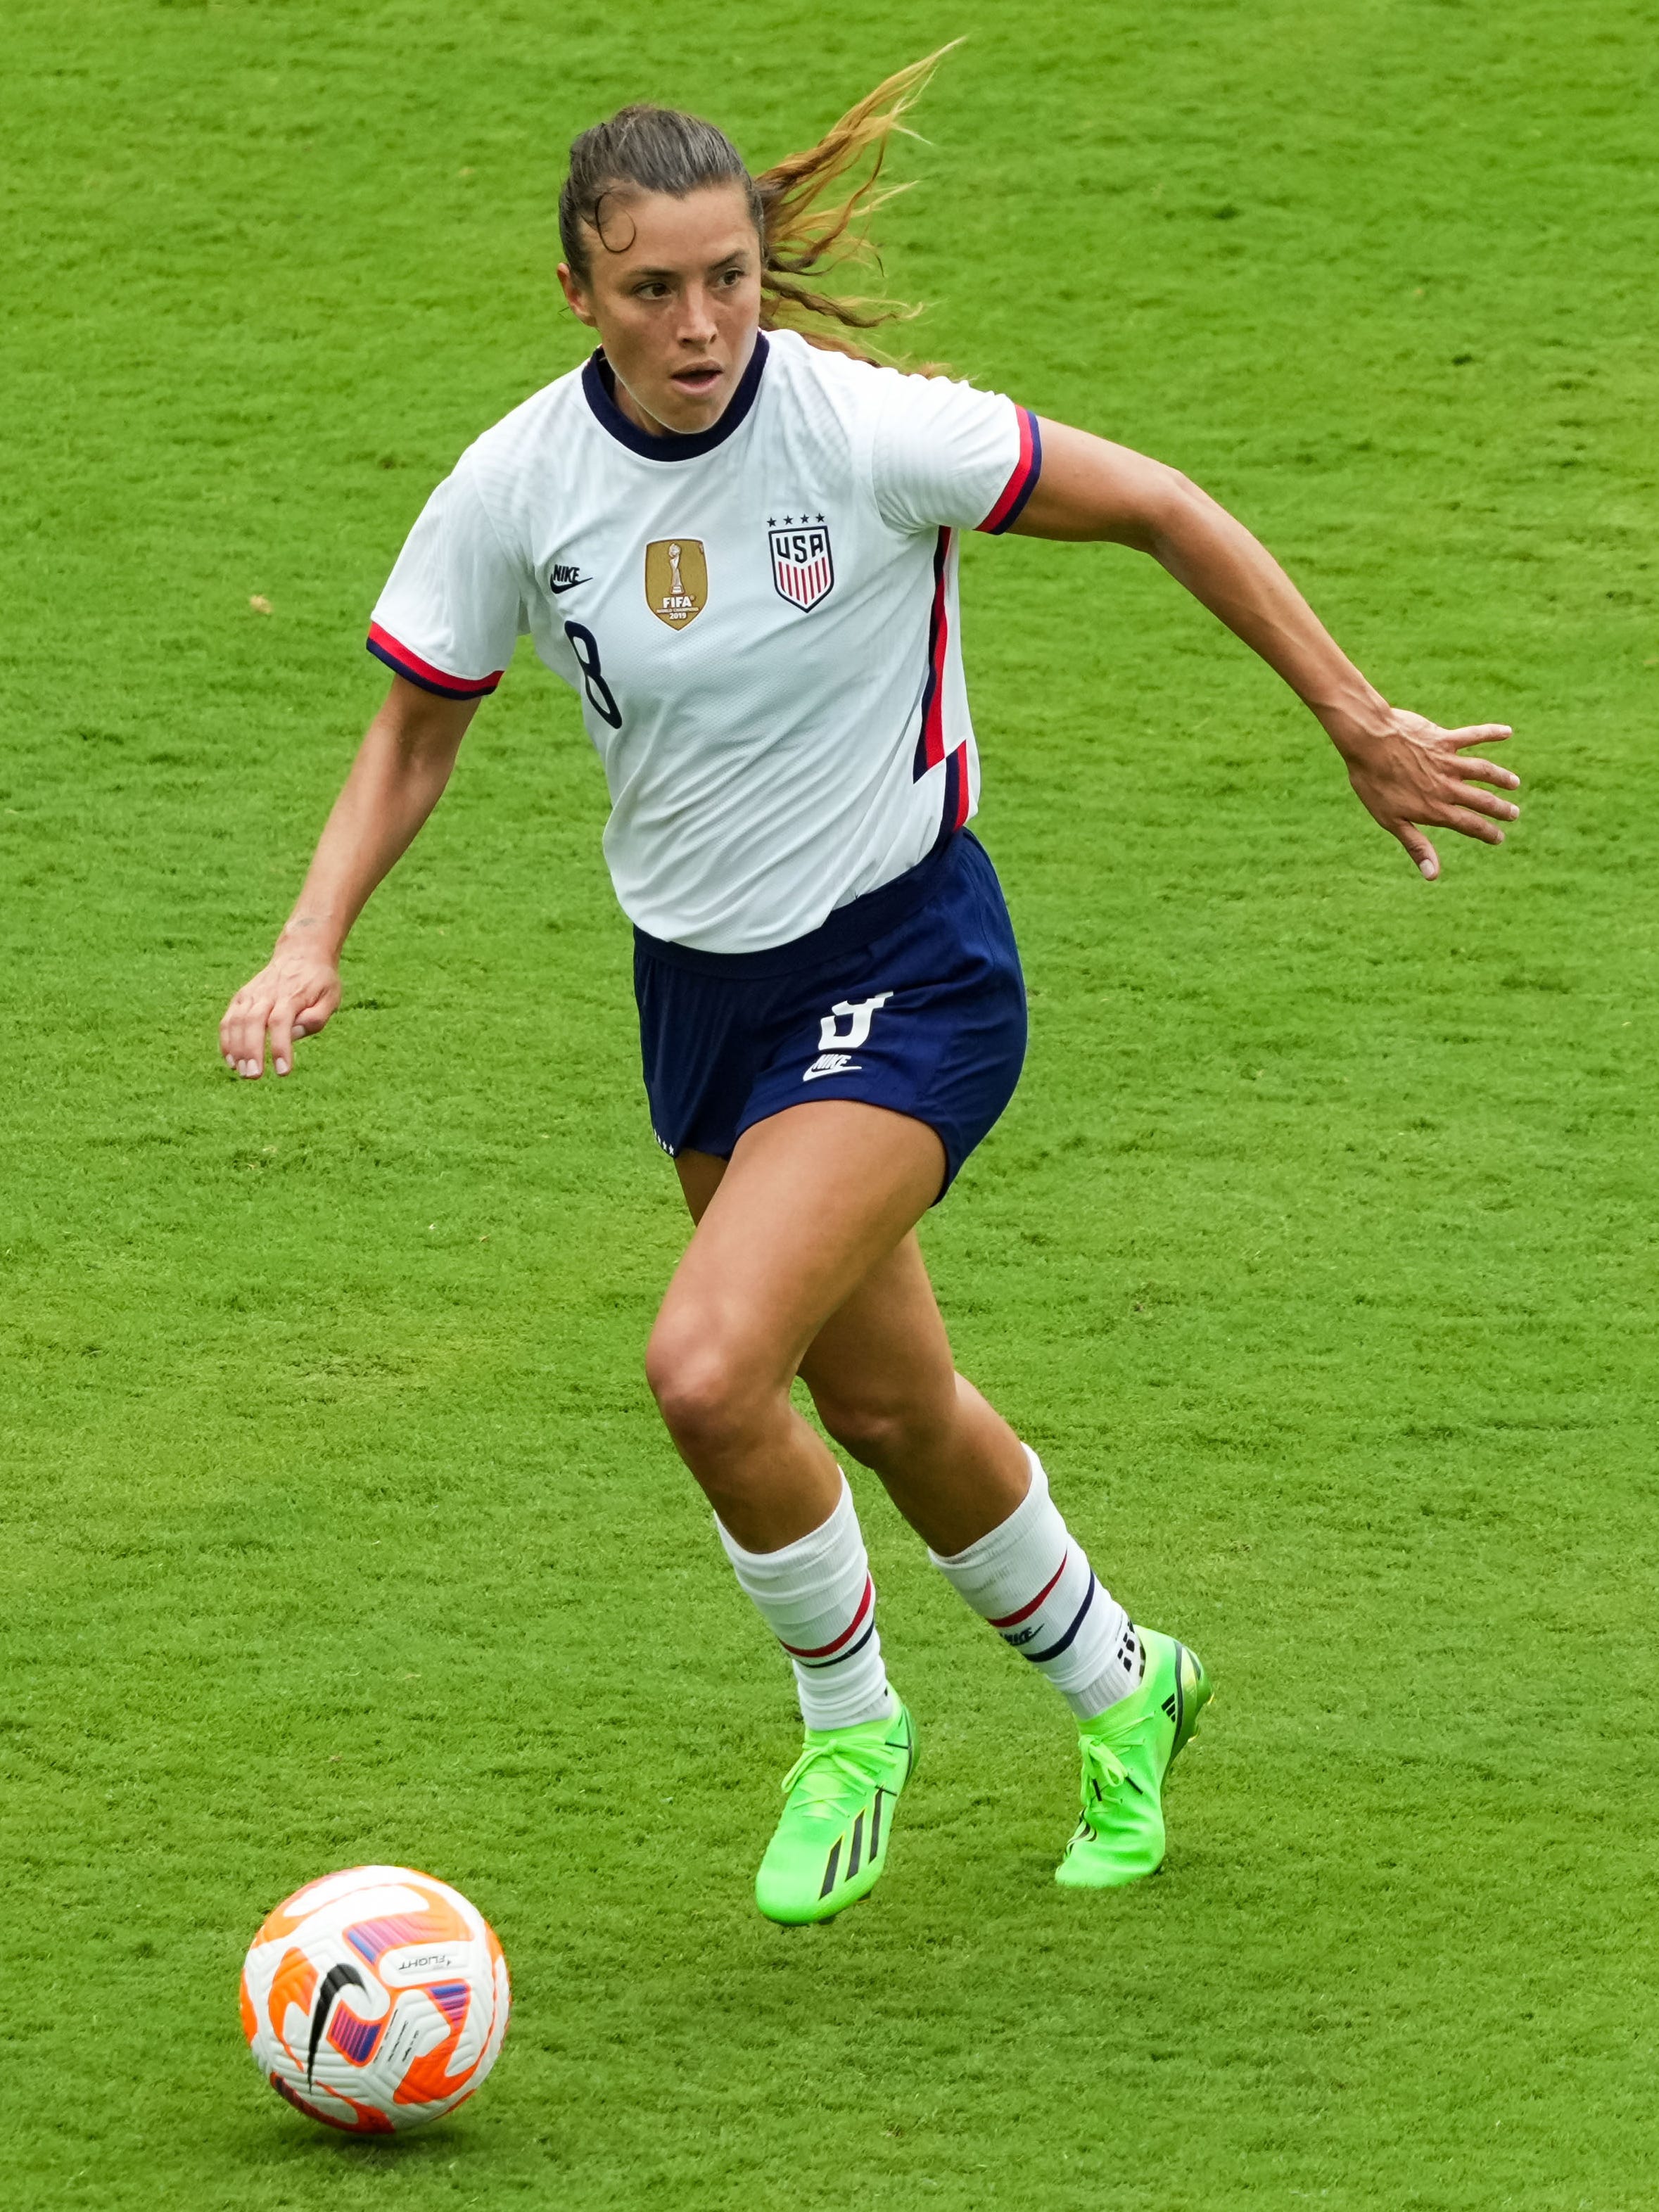 An action image of Sofia Huerta playing soccer.